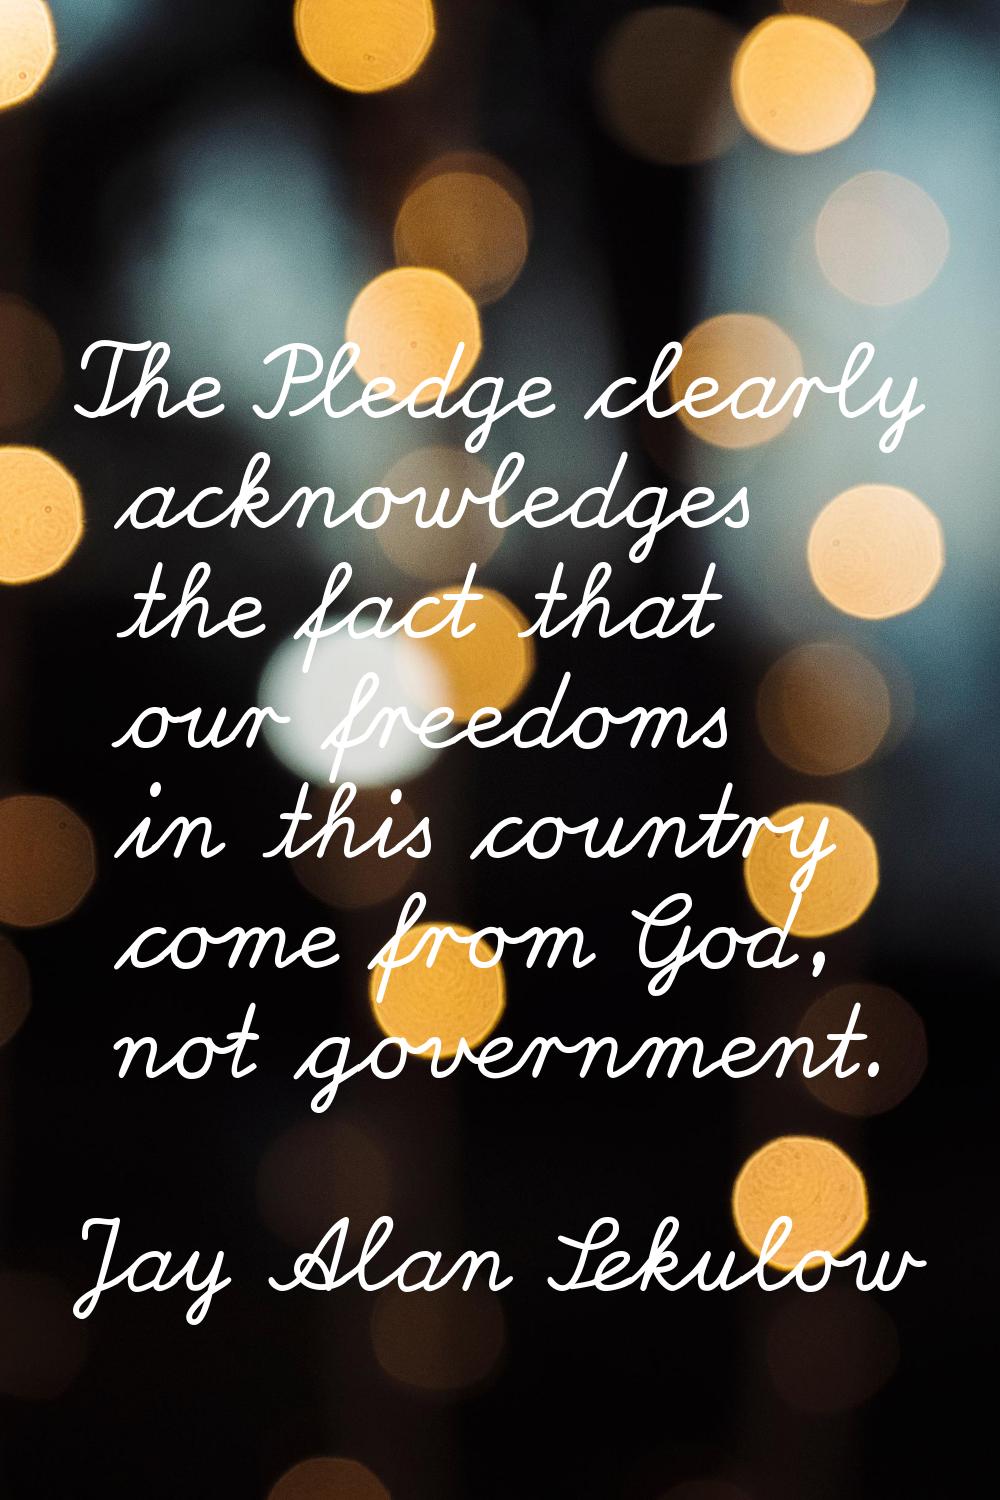 The Pledge clearly acknowledges the fact that our freedoms in this country come from God, not gover